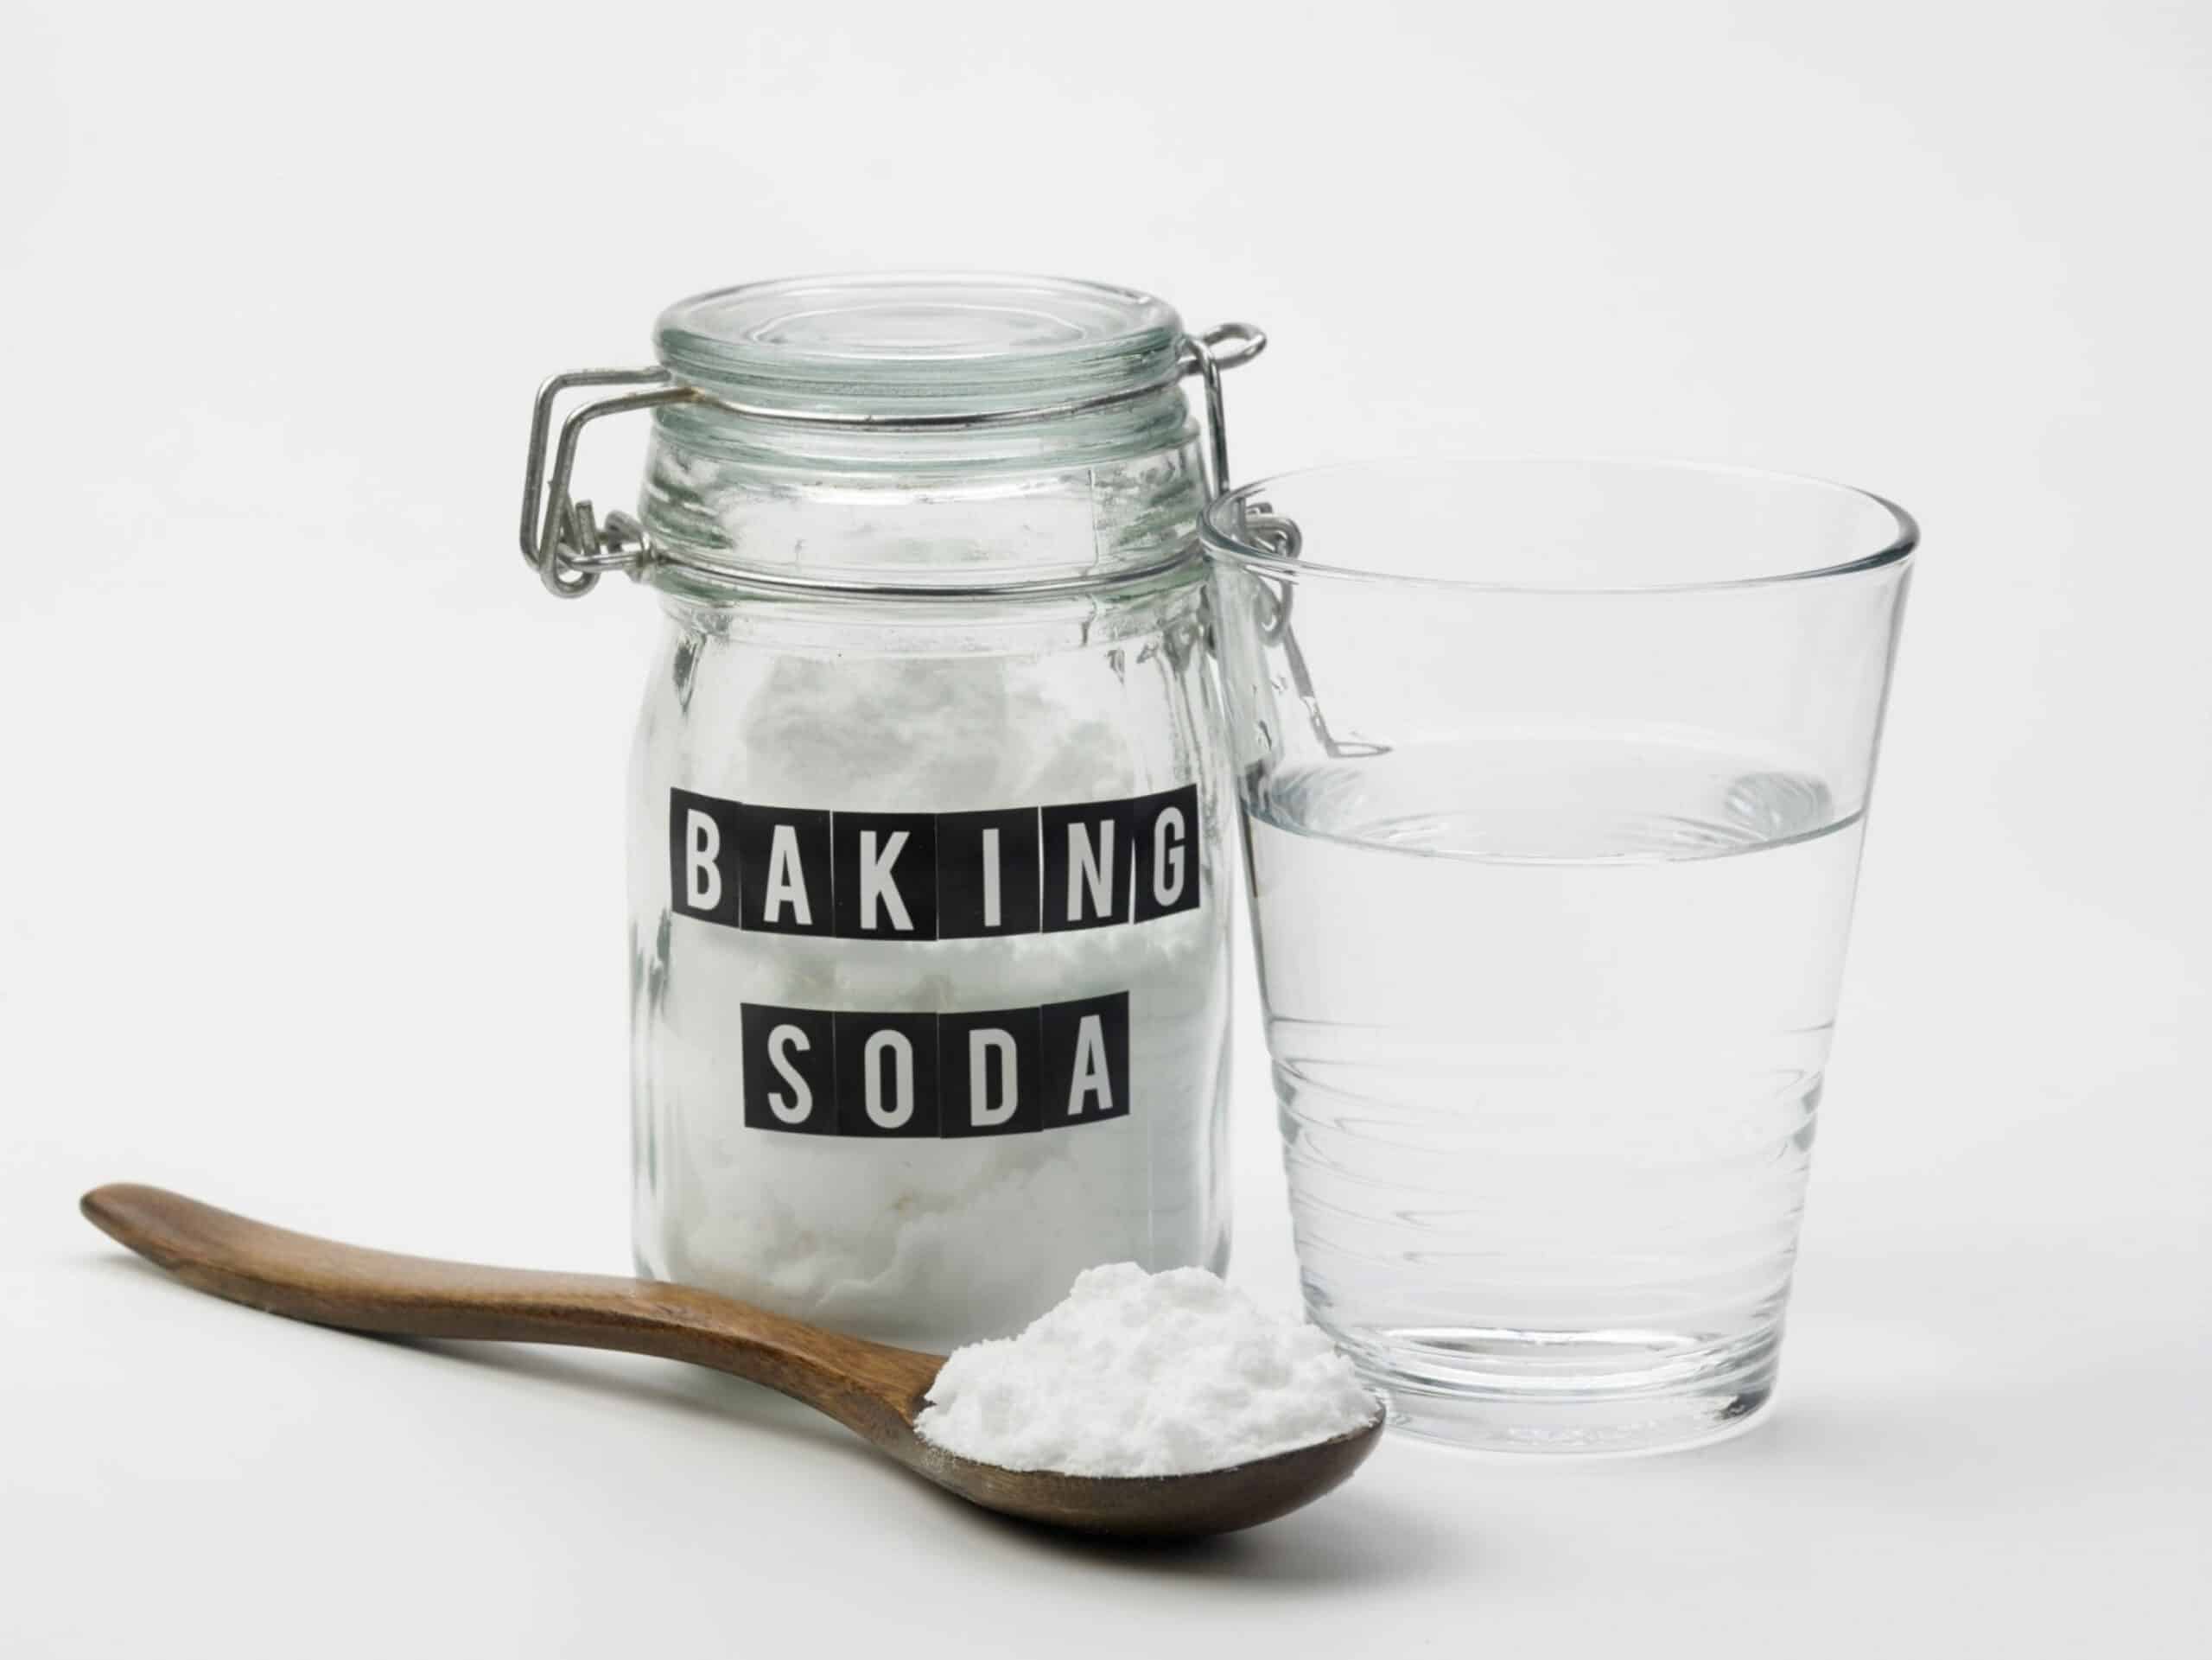 Baking Soda With a cup of Water